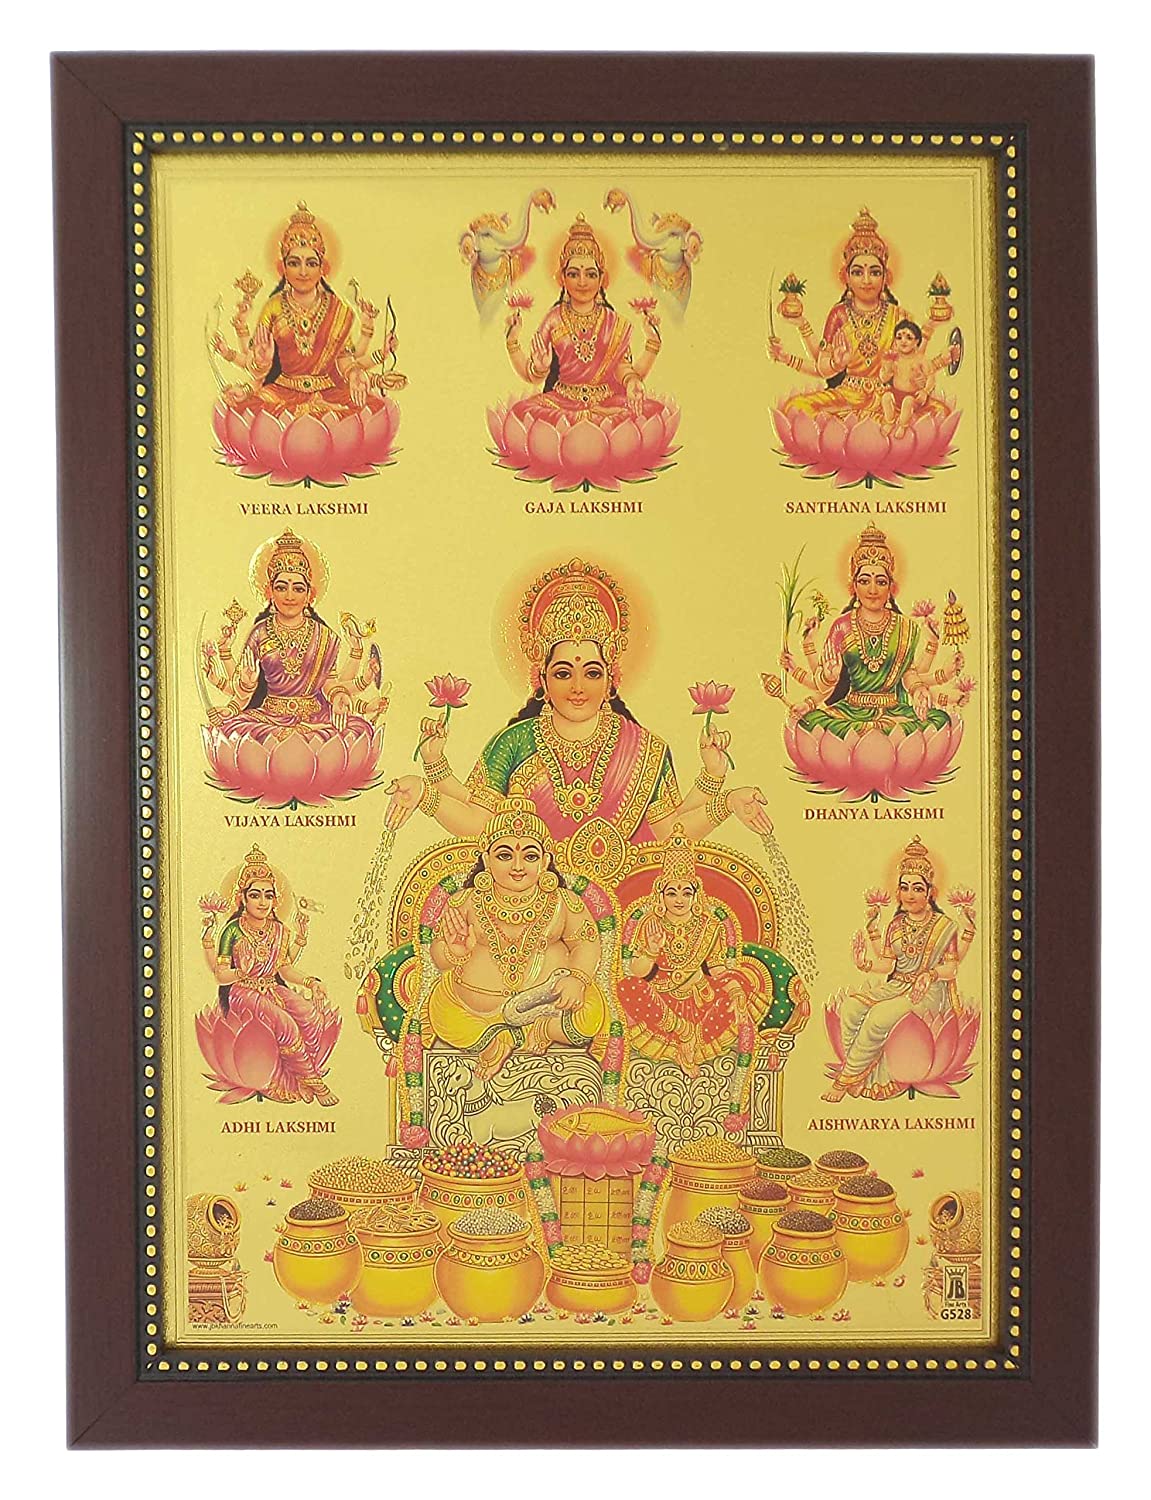 Buy RSEXPO Lord Kubera Ashta Lakshmi Photo Frame (34cm x 25cm x 1.5cm)God Gods and Goddess. (Wood, Brown) Online at Low Prices in India